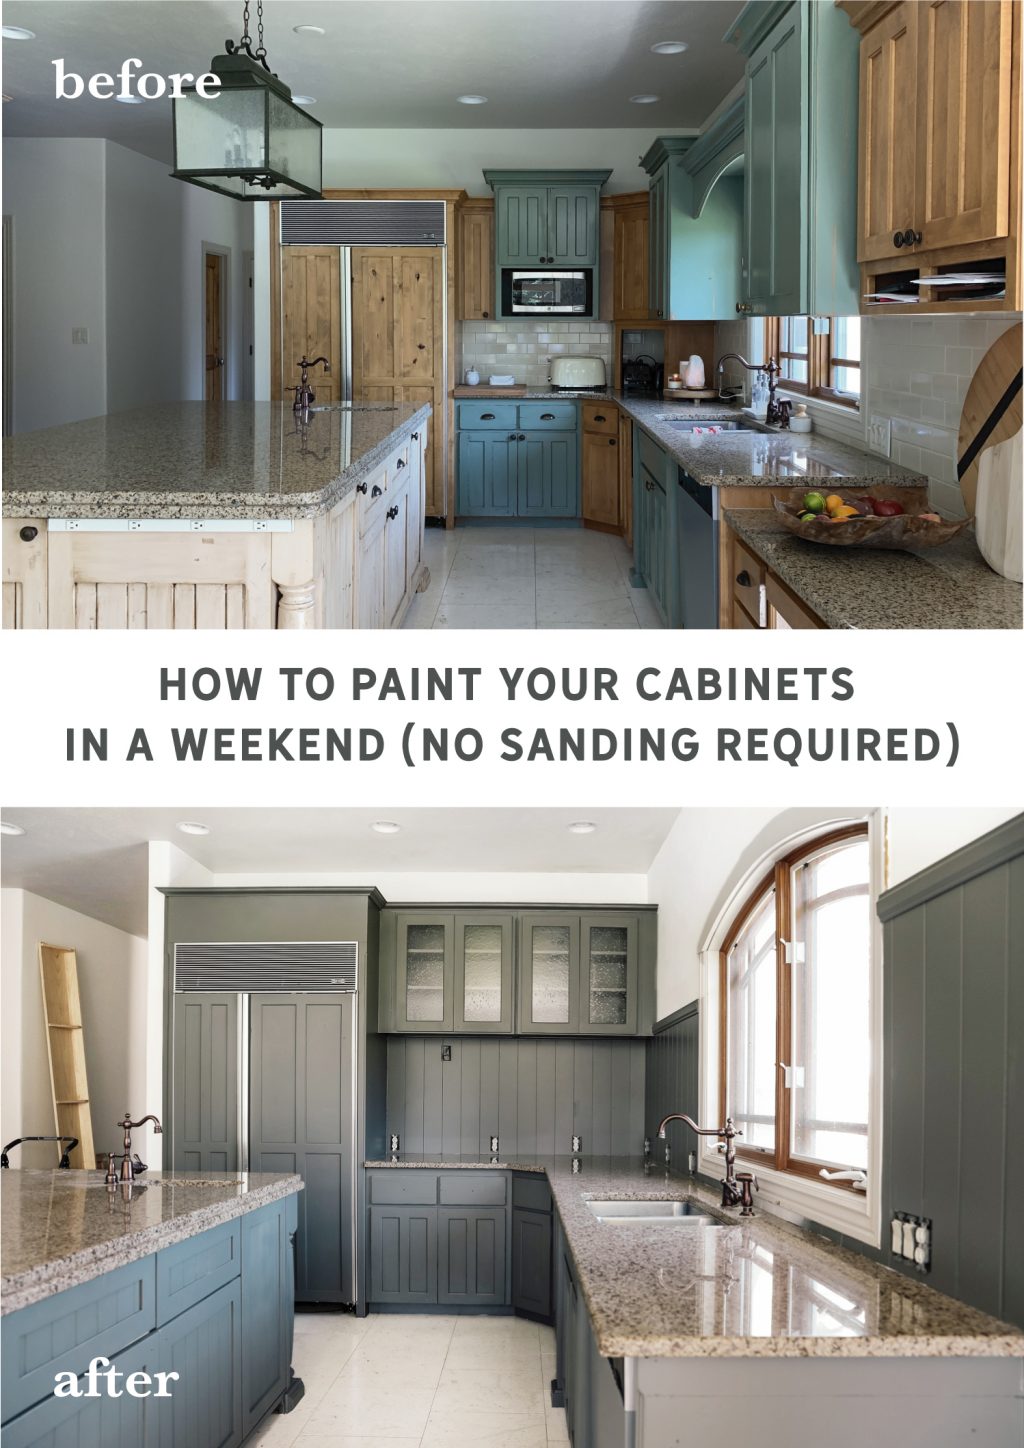 How To Paint Your Cabinets In A Weekend, Painting Kitchen Cabinets And Replacing Countertops